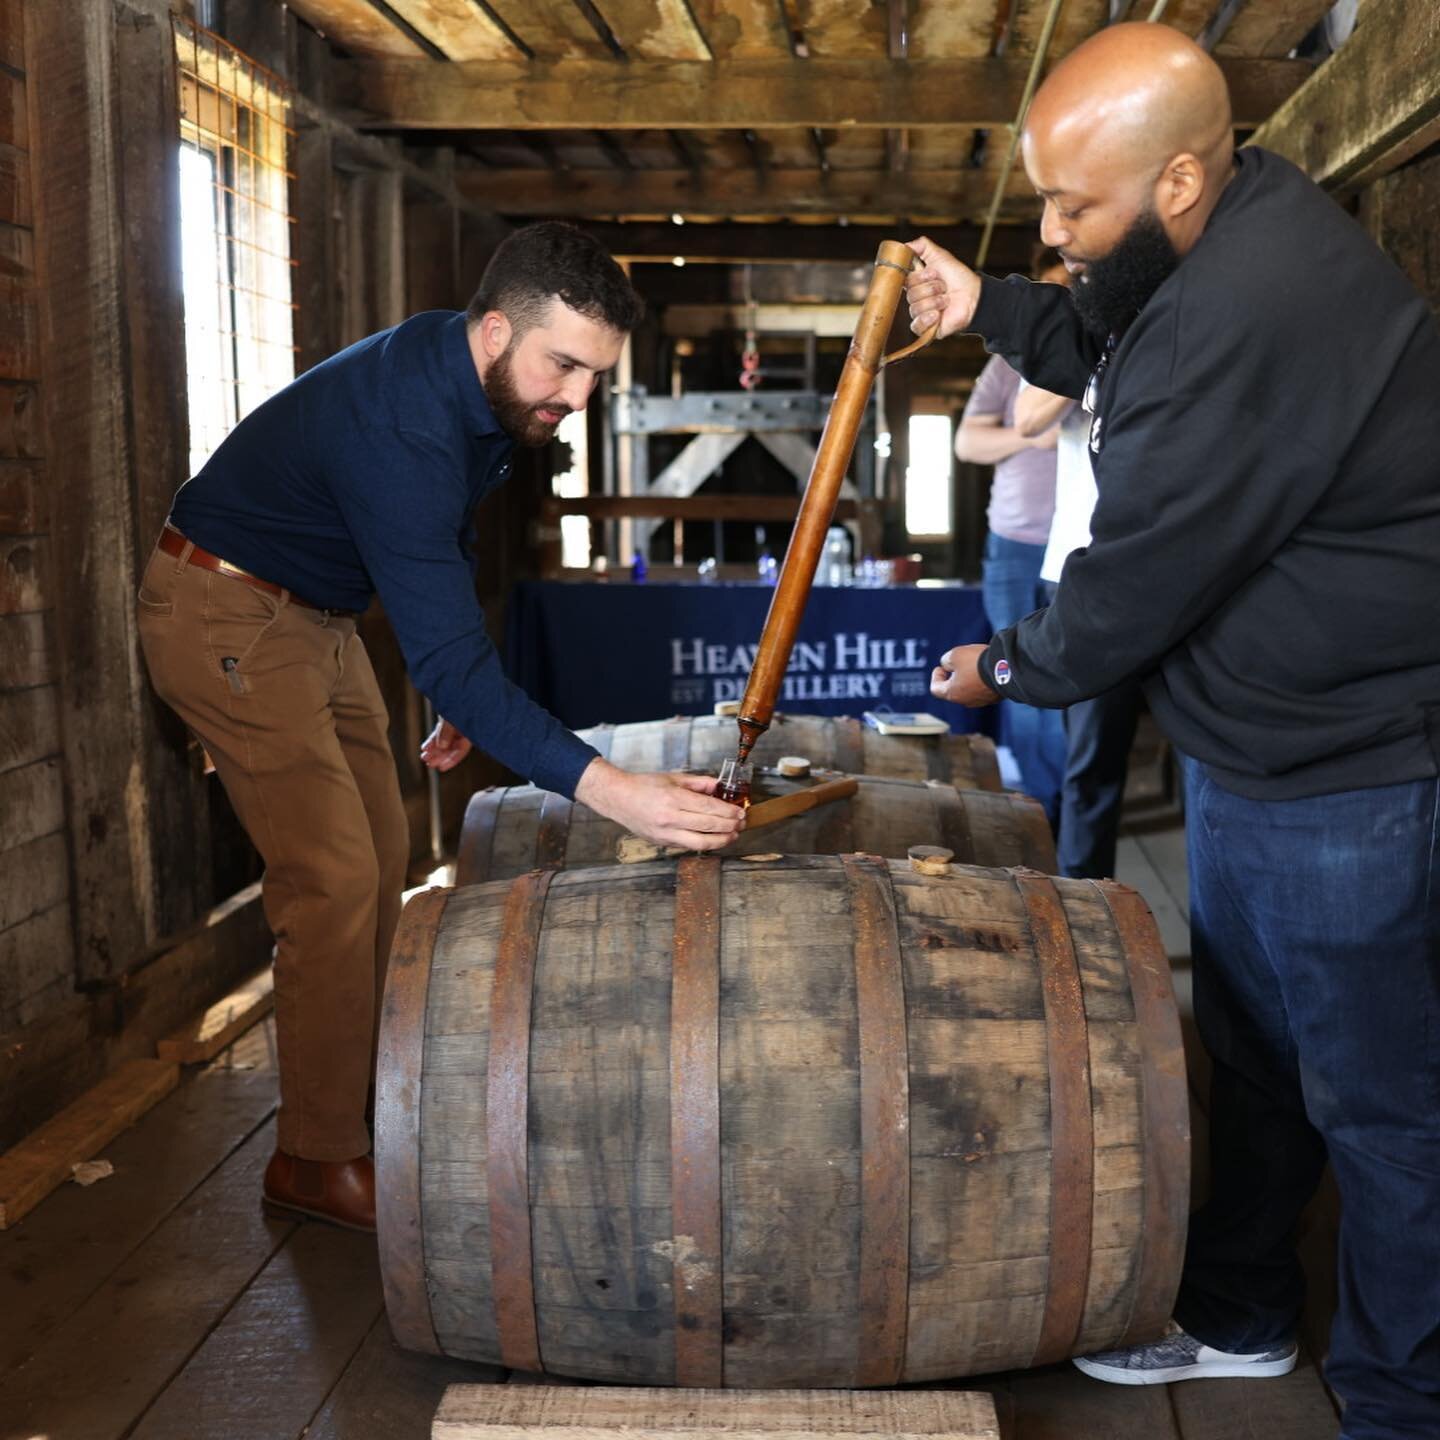 I hadn&rsquo;t traveled in over a year, but when @neatrockscocktail invited me to do a @tasteselectrepeat barrel pick, I couldn&rsquo;t say no (&lsquo;&lsquo;twas also my birthday week). What I didn&rsquo;t realize is that, hanging out with TSR is a 